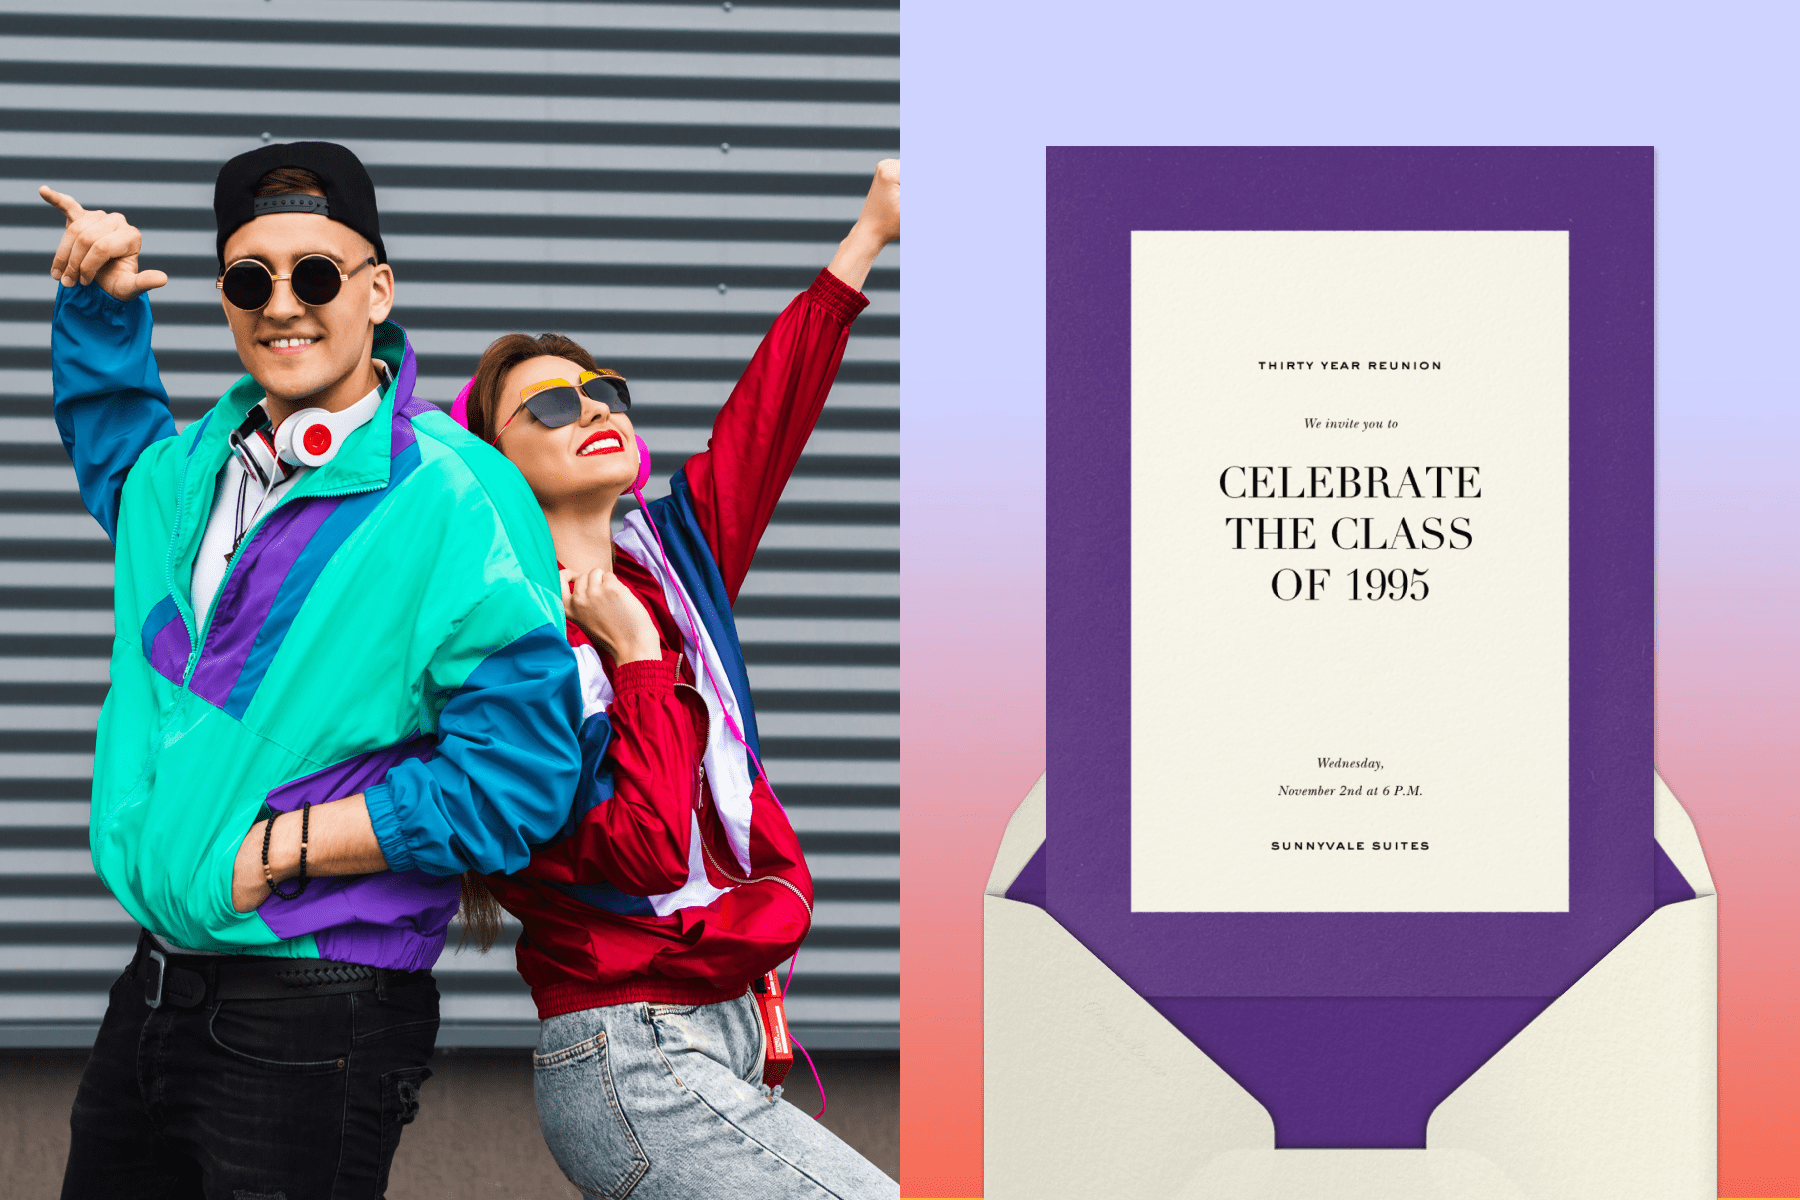 Two people posing in retro ‘90s clothing; A class reunion invitation for the class of 1995.